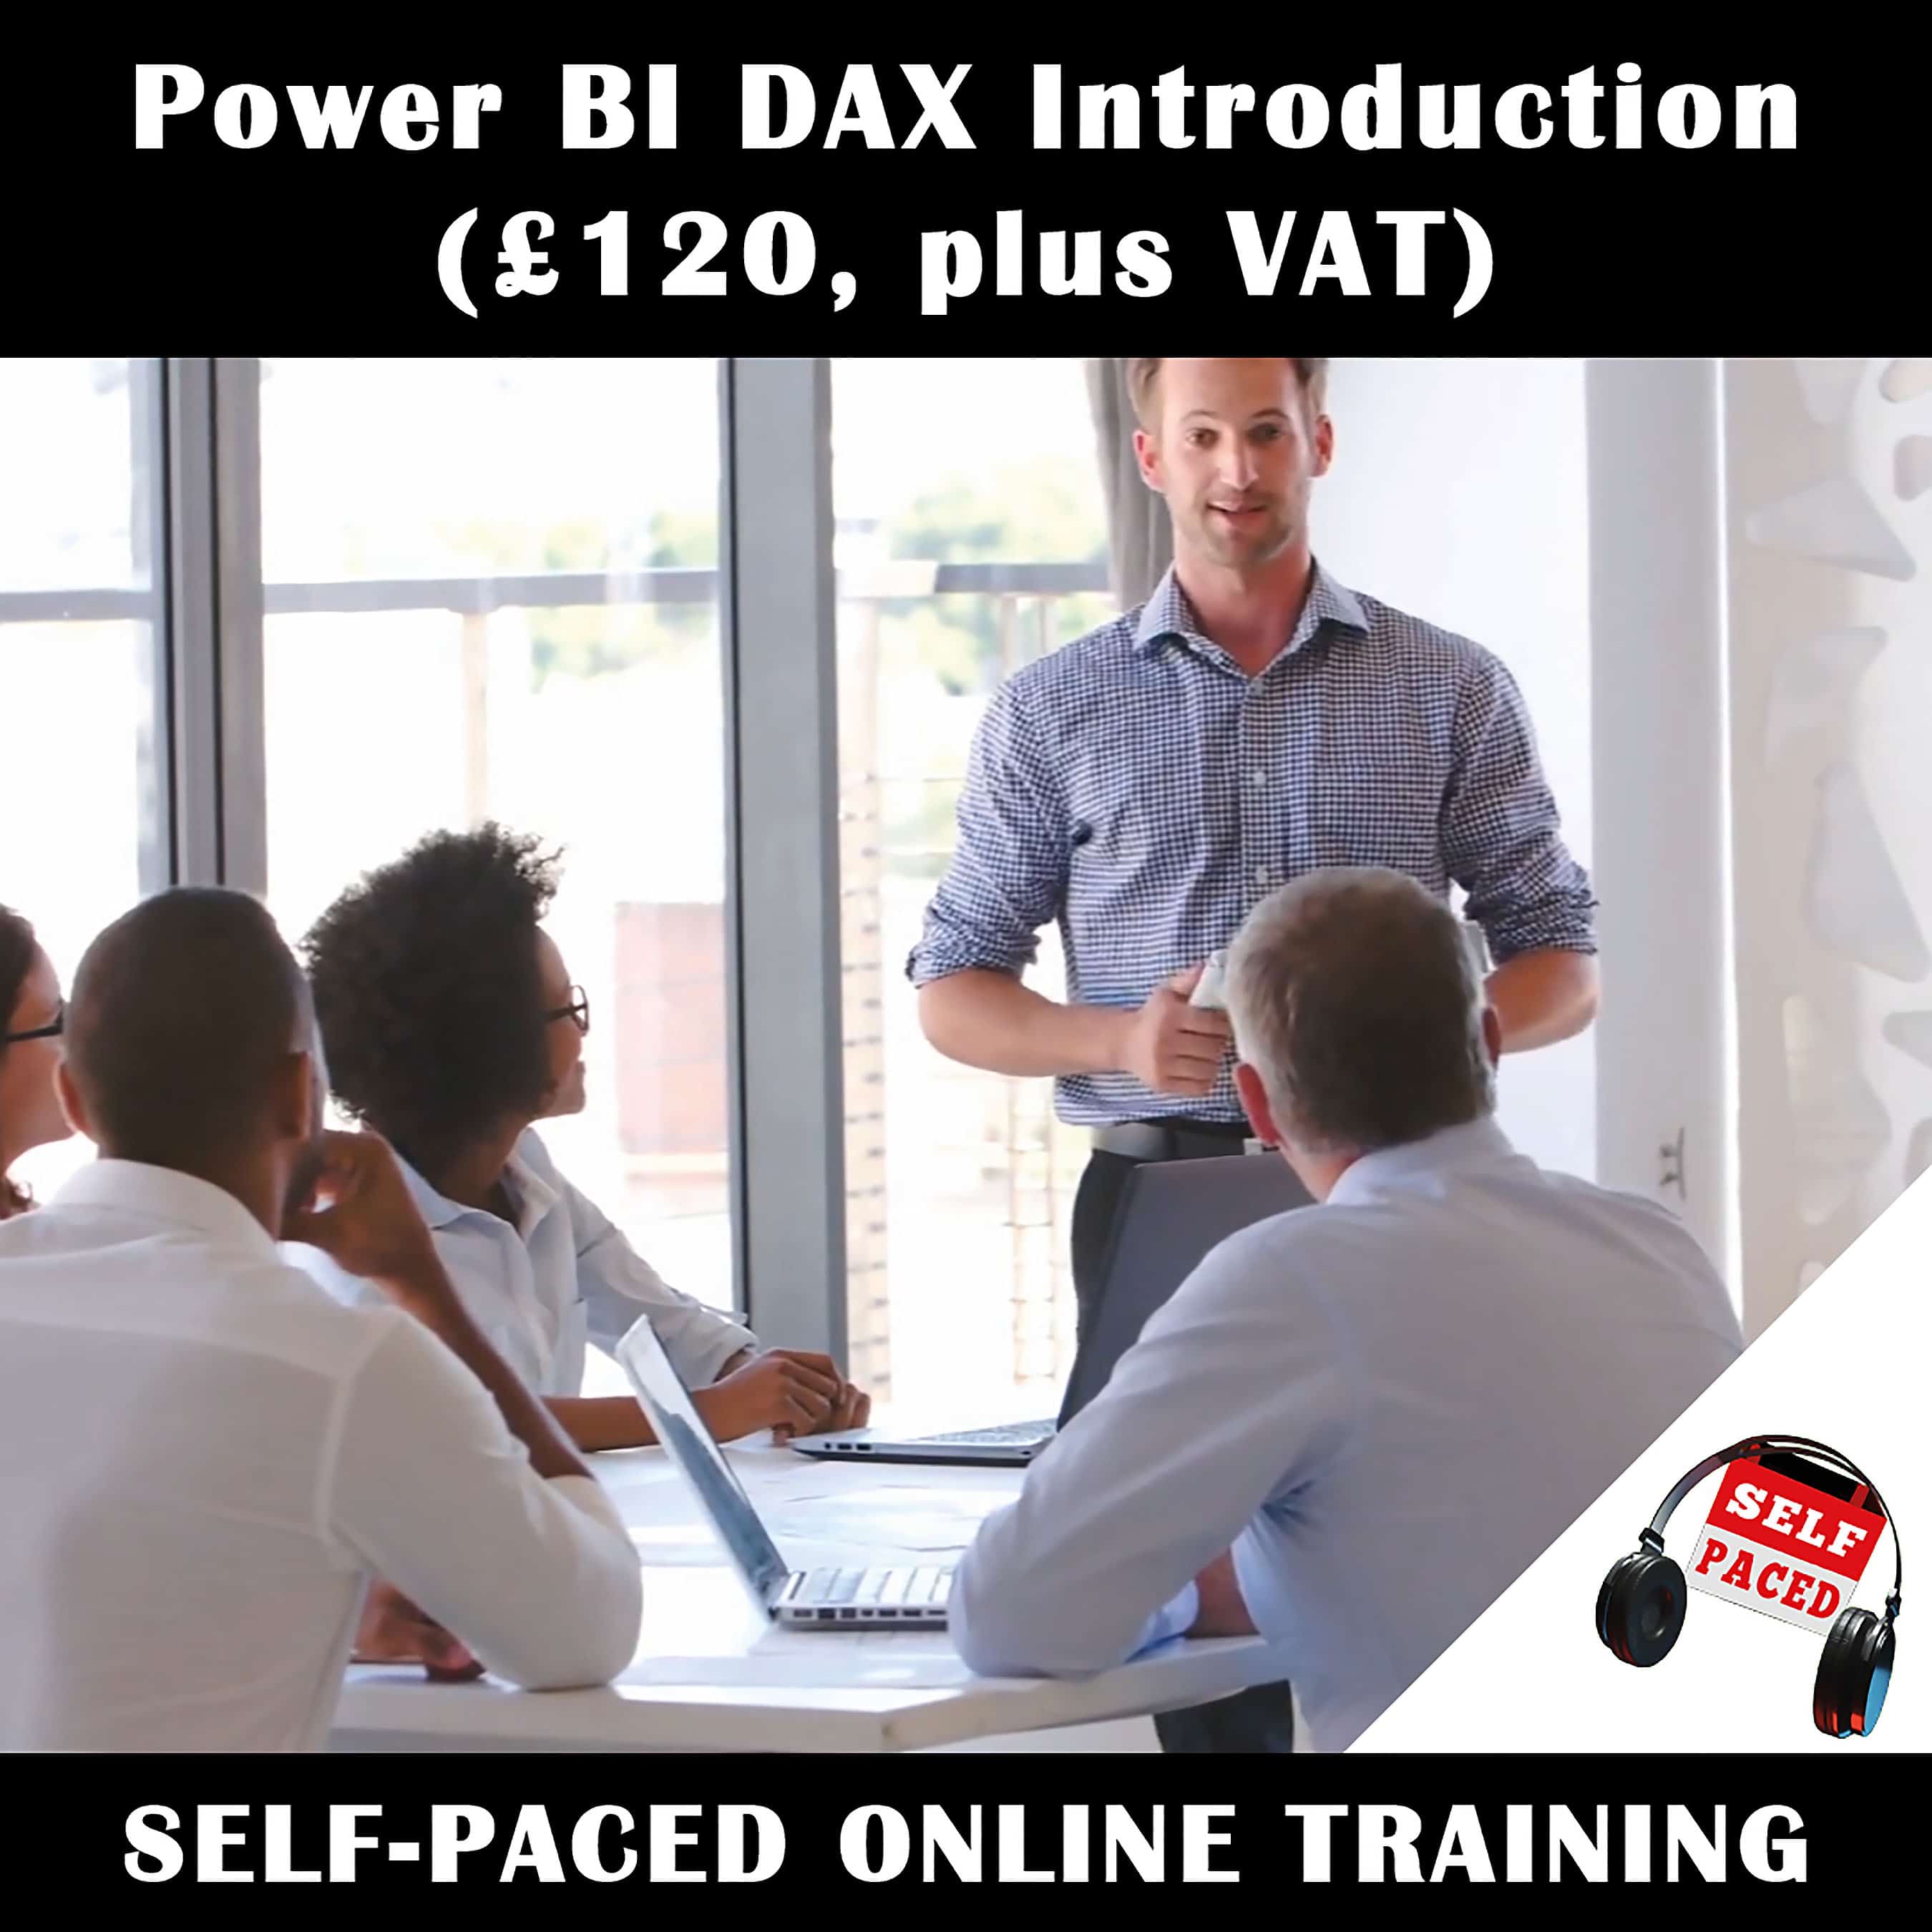 Power BI Self-Paced DAX Introduction